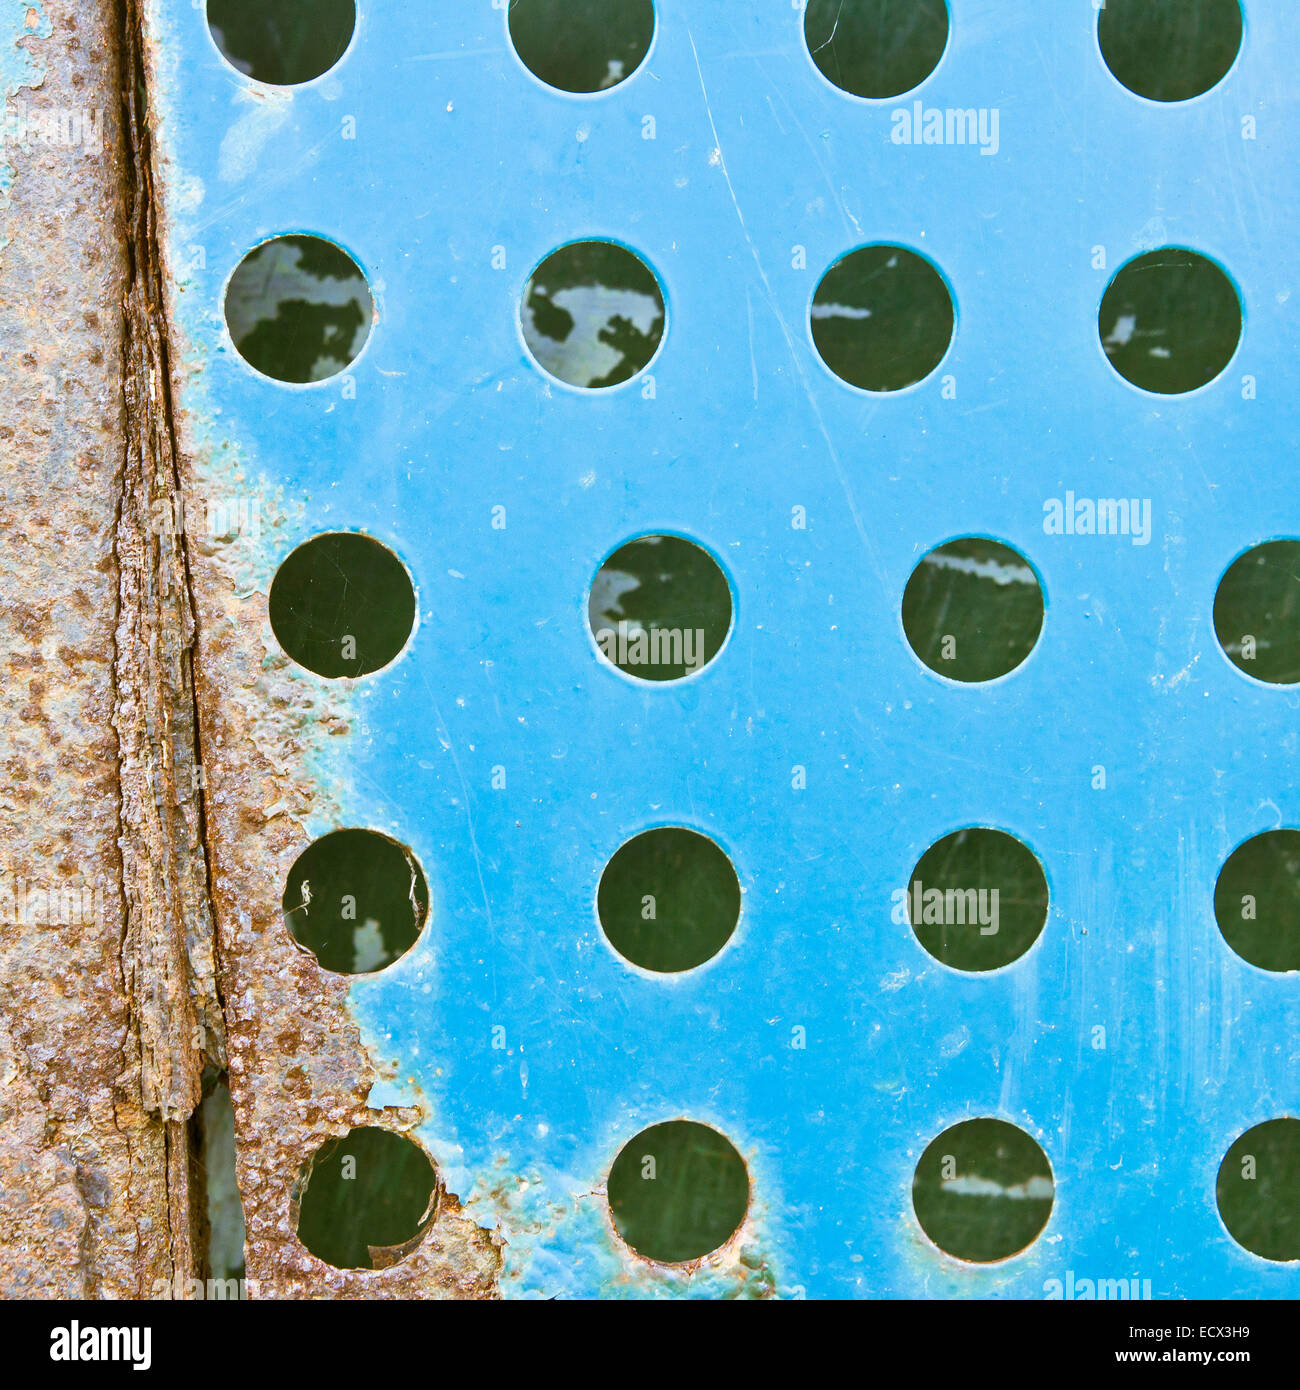 Rusty blue fenestrated metal surface Stock Photo